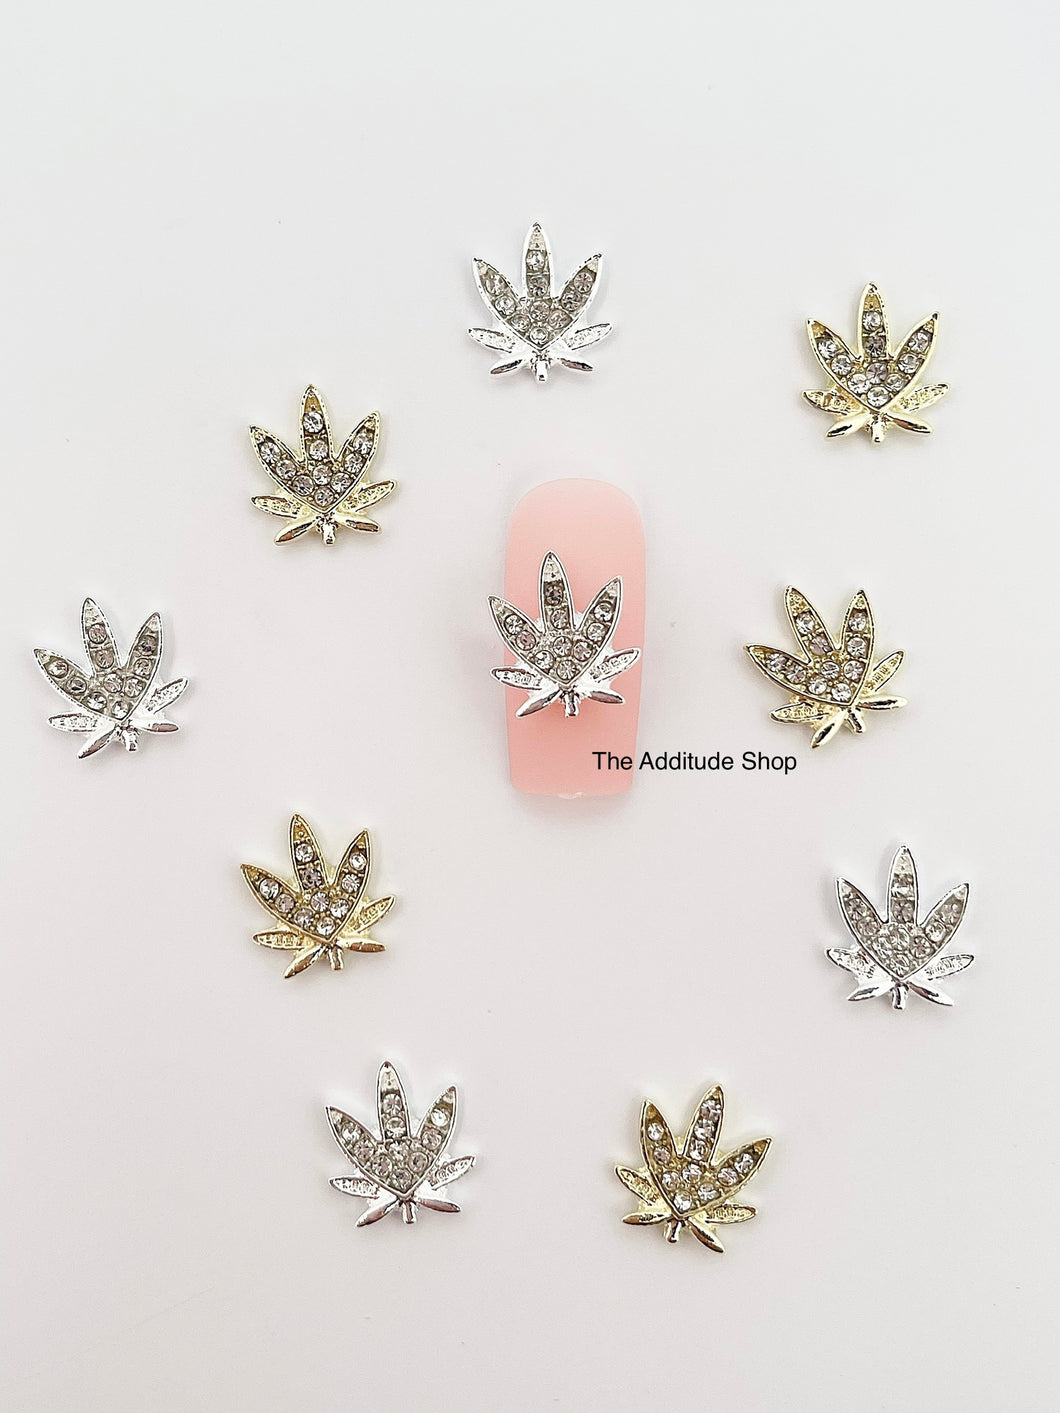 420 Nail 3D Charms Version #2-10 Pieces